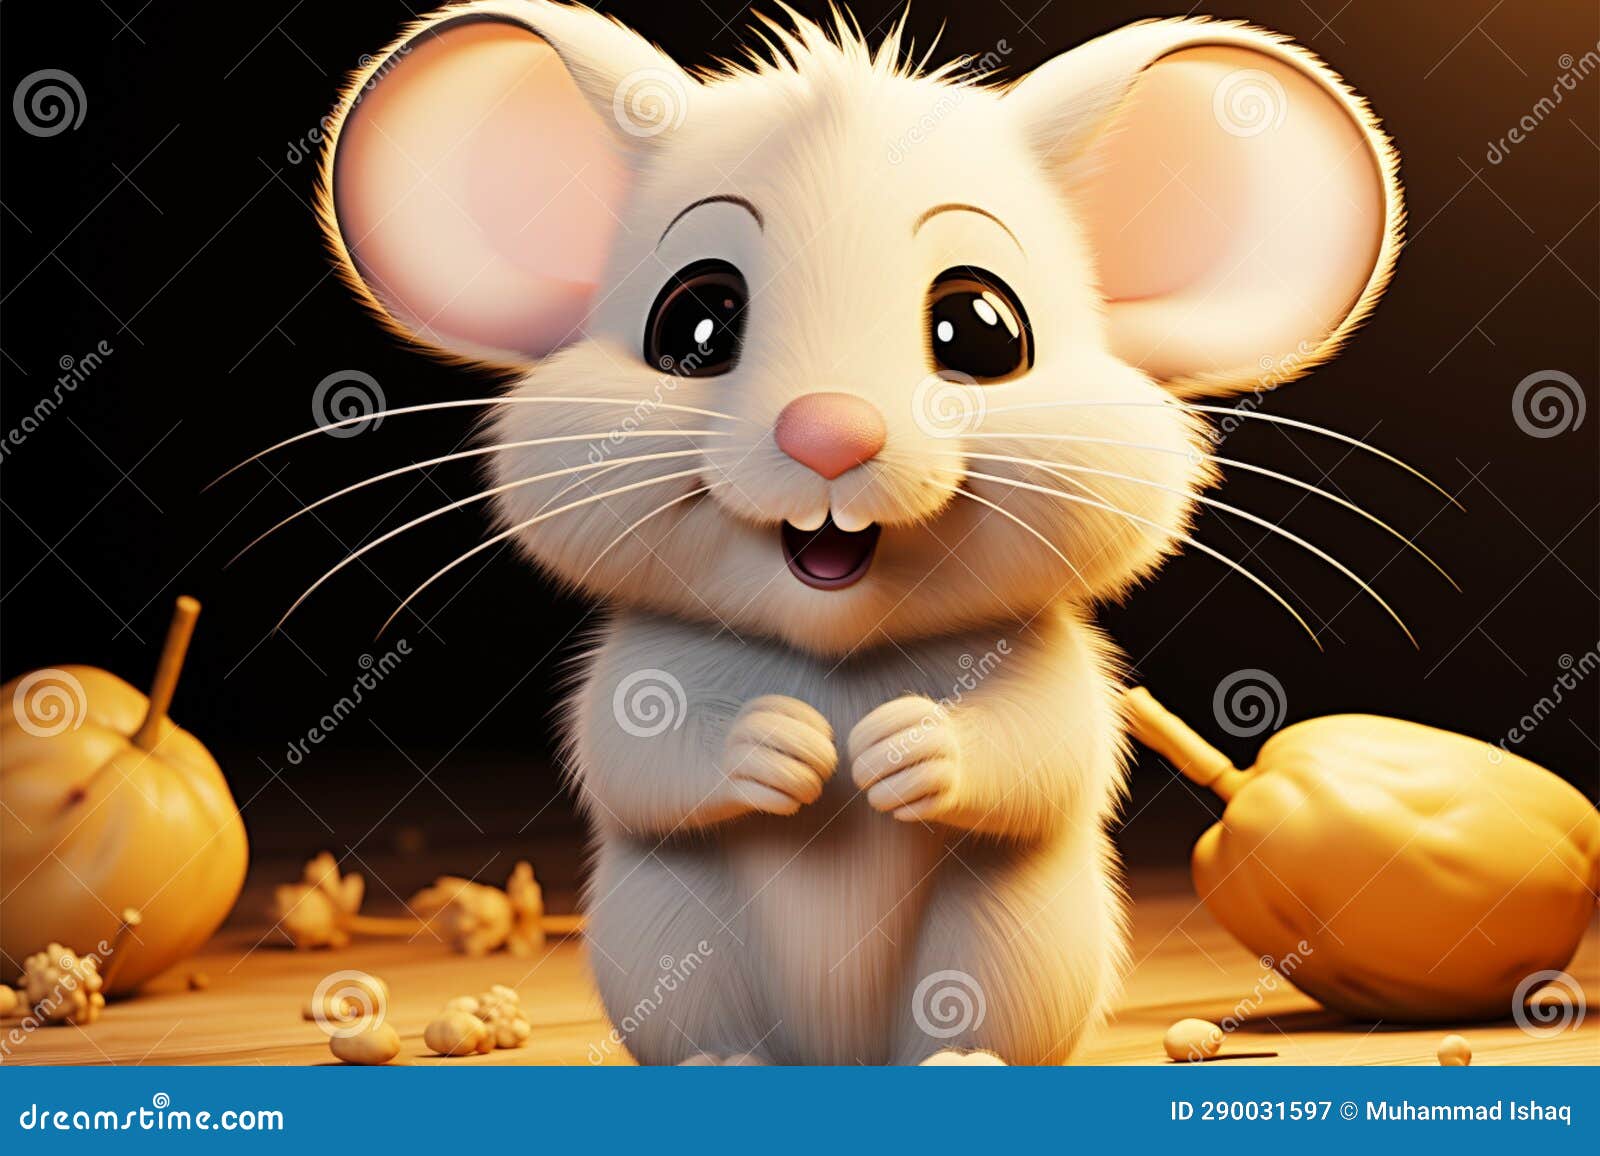 mouse in animated form entertains with a humorous, expressive countenance